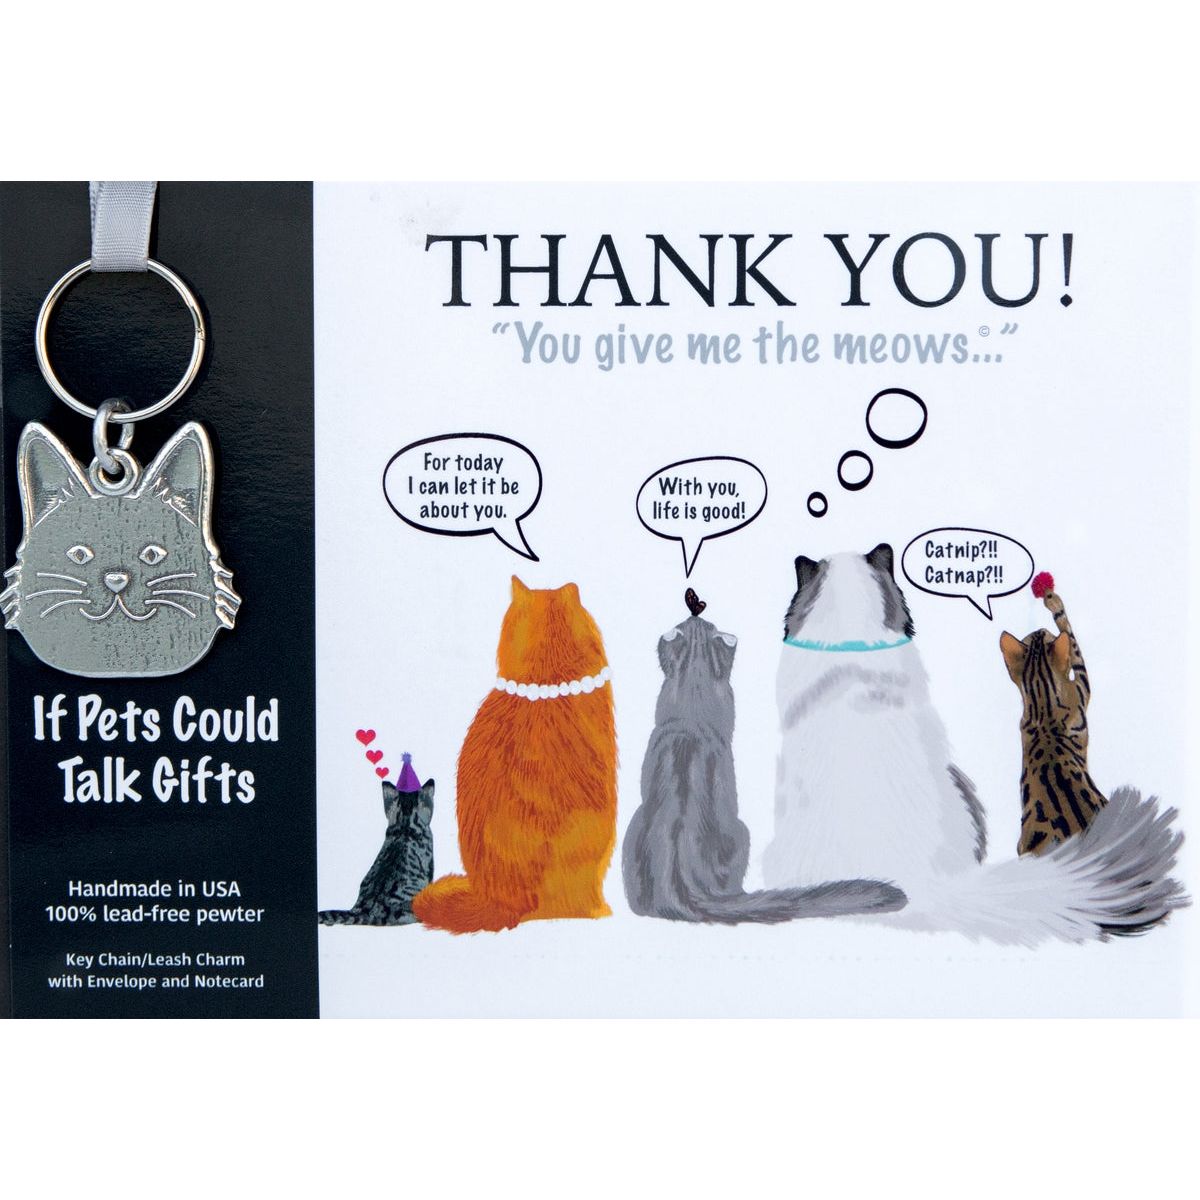 Pewter keychain in shape of a cat&#39;s face packaged with a Thank You card